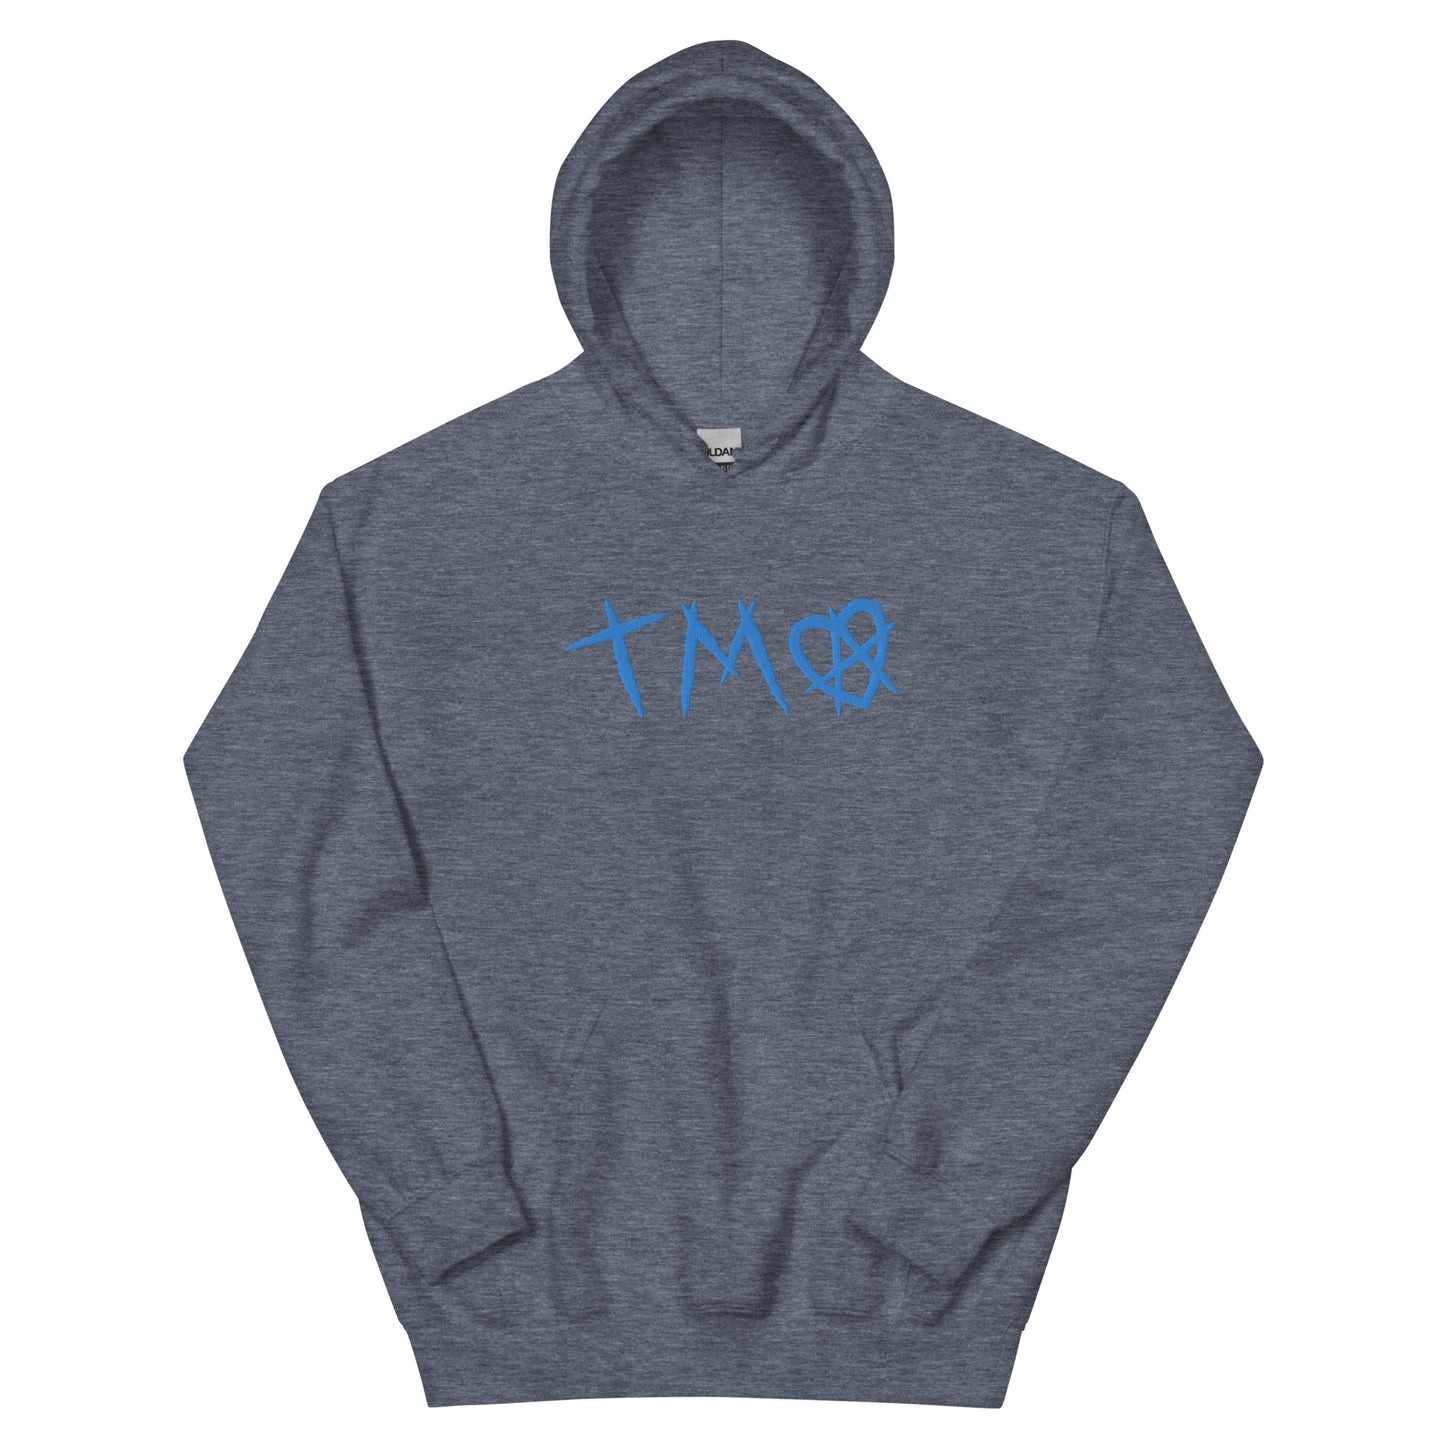 The Montauk Affect TMA Embroidered Unisex Hoodie